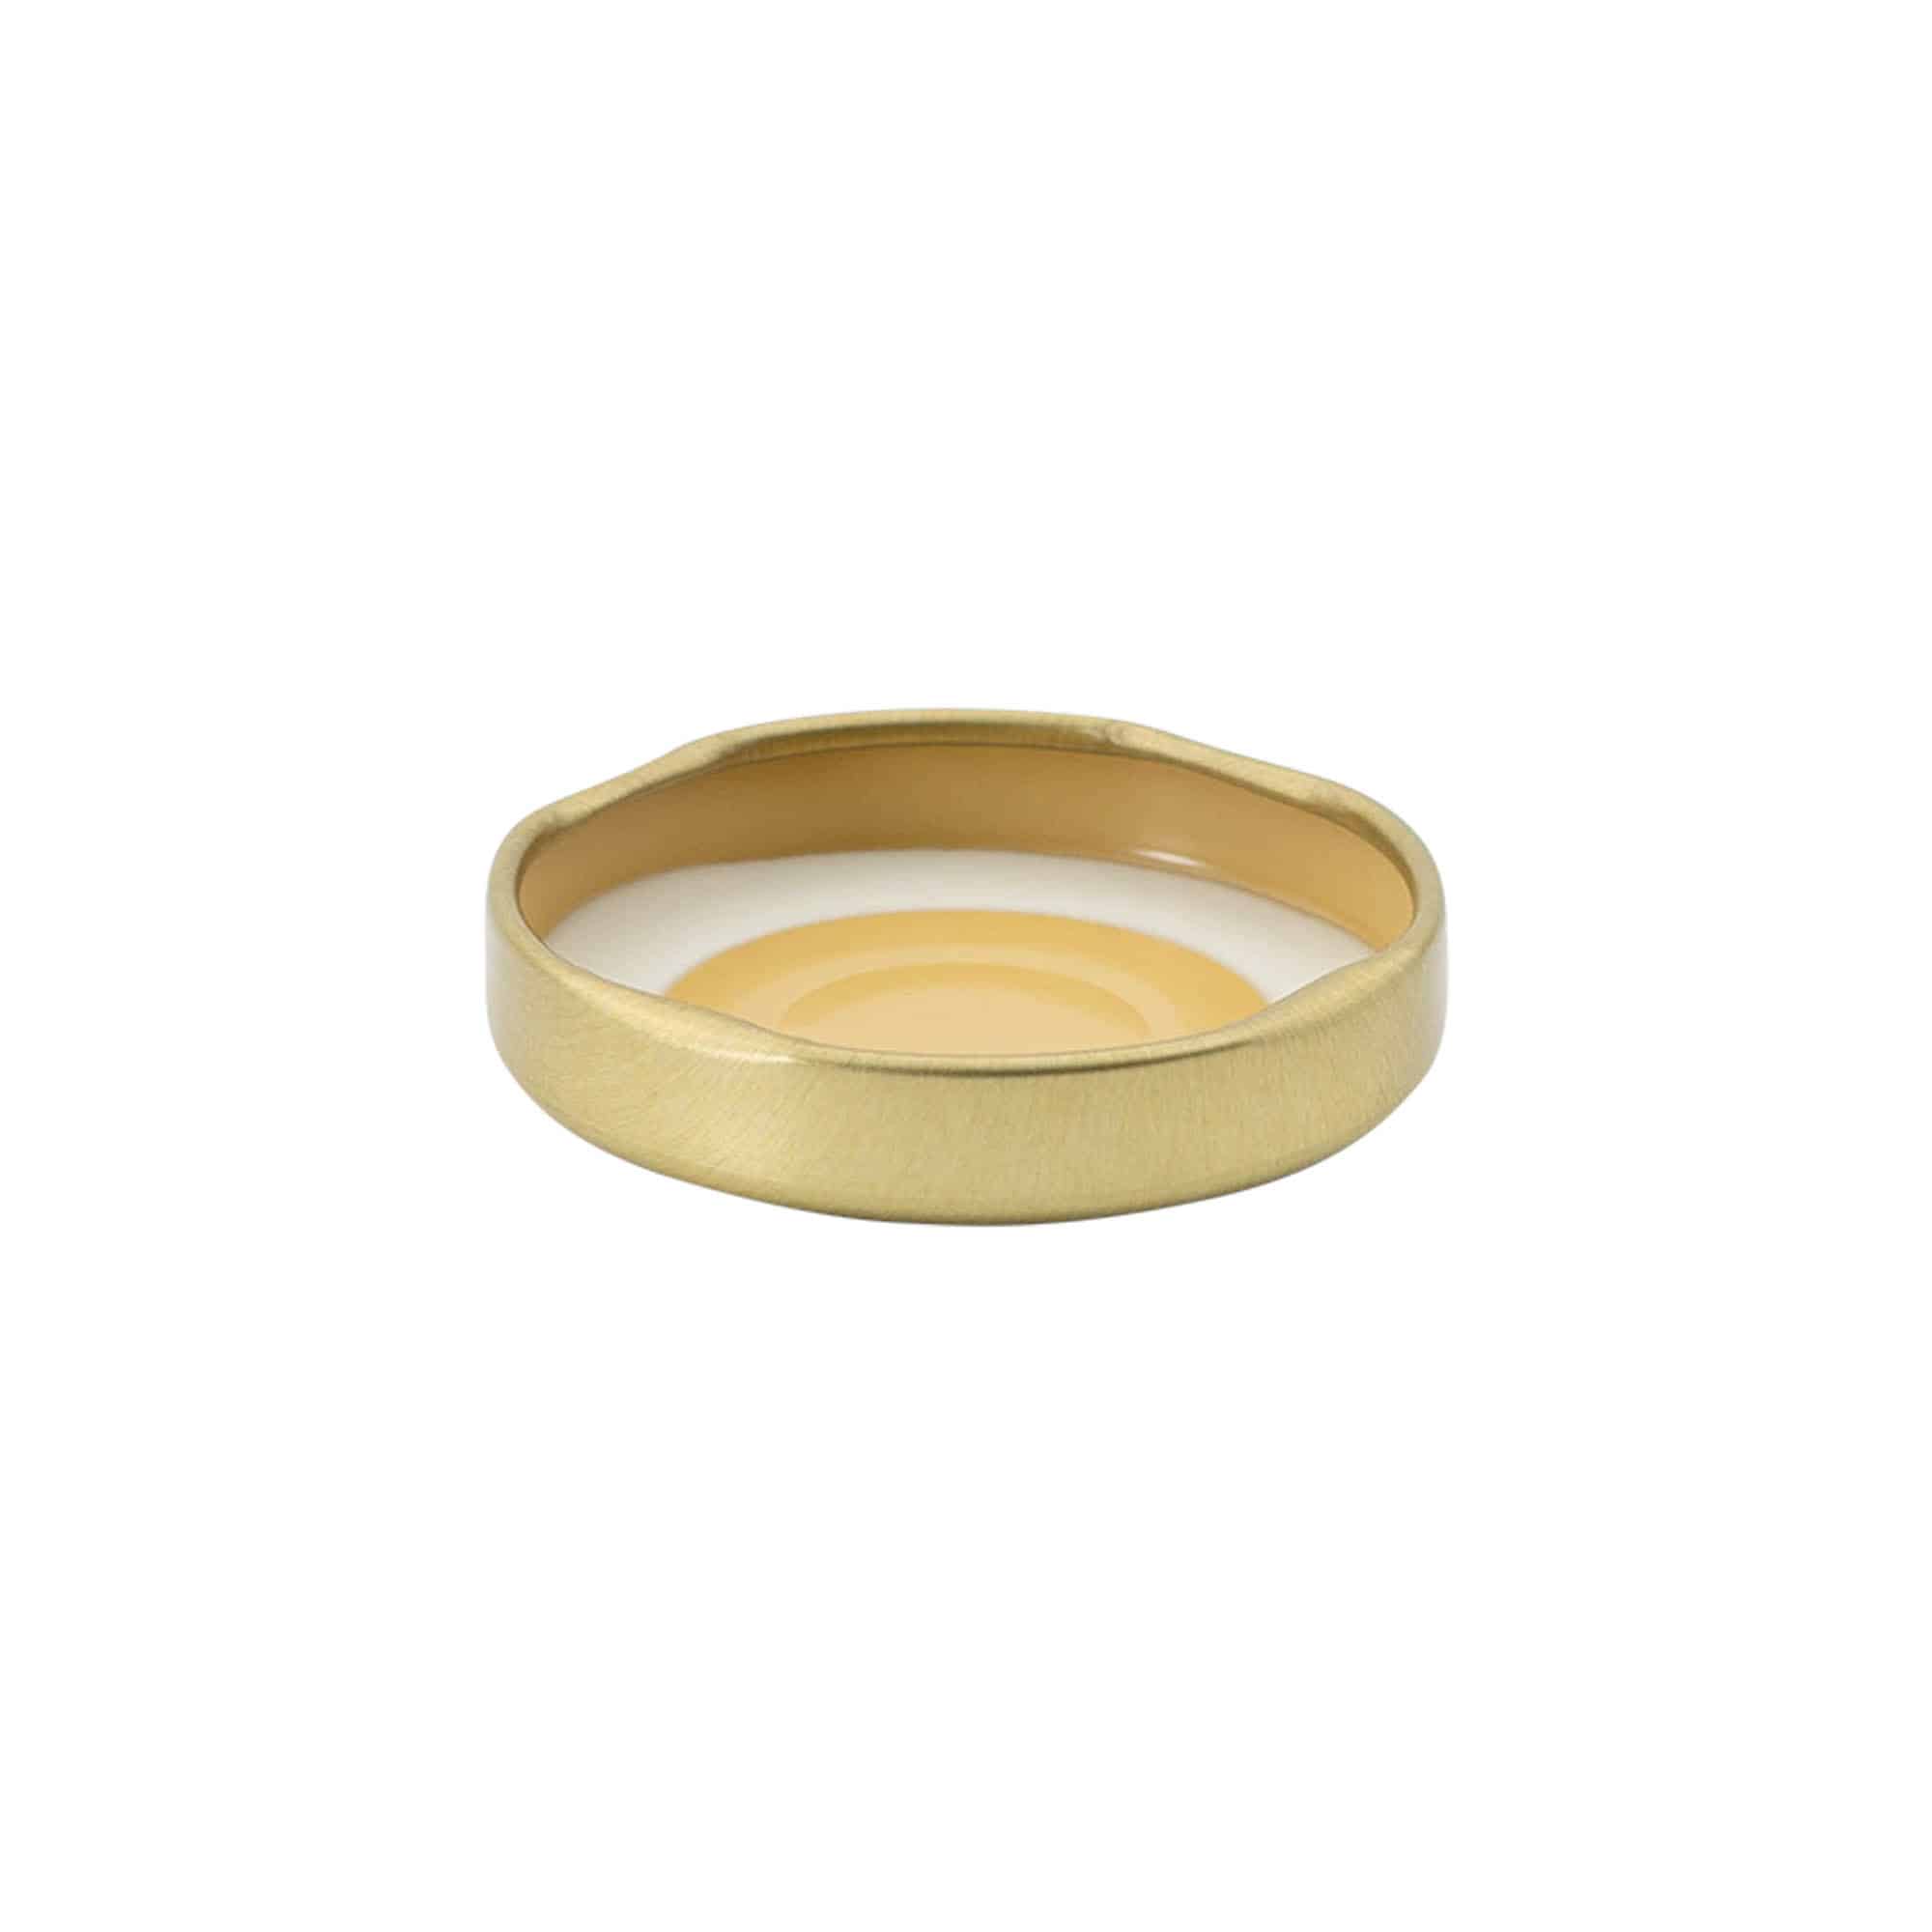 Twist off lid, tinplate, gold, for opening: TO 43